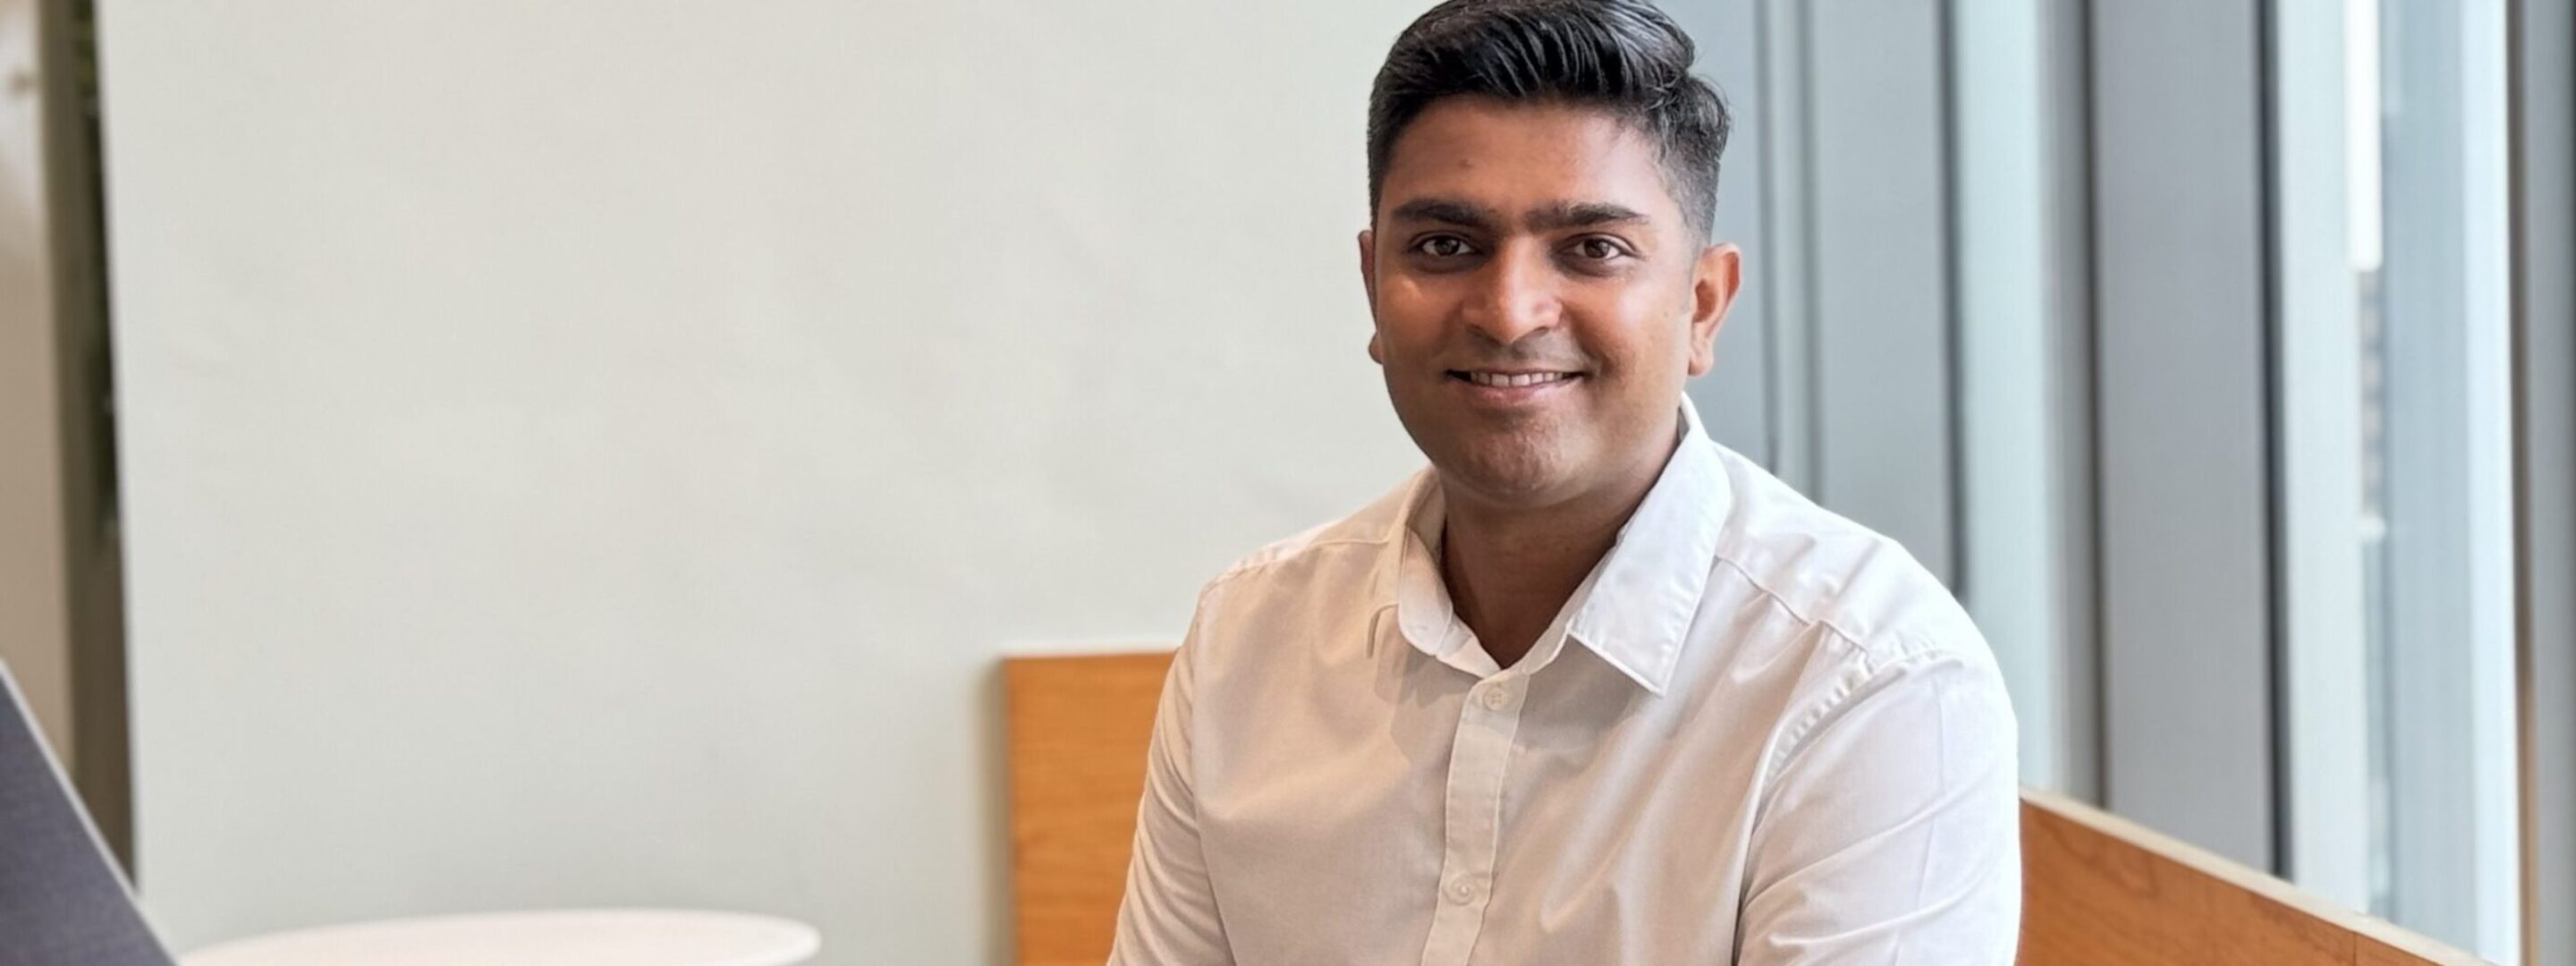 Collaborating behind the scenes helps connect more Telcos to the digital universe, says Telenor Linx